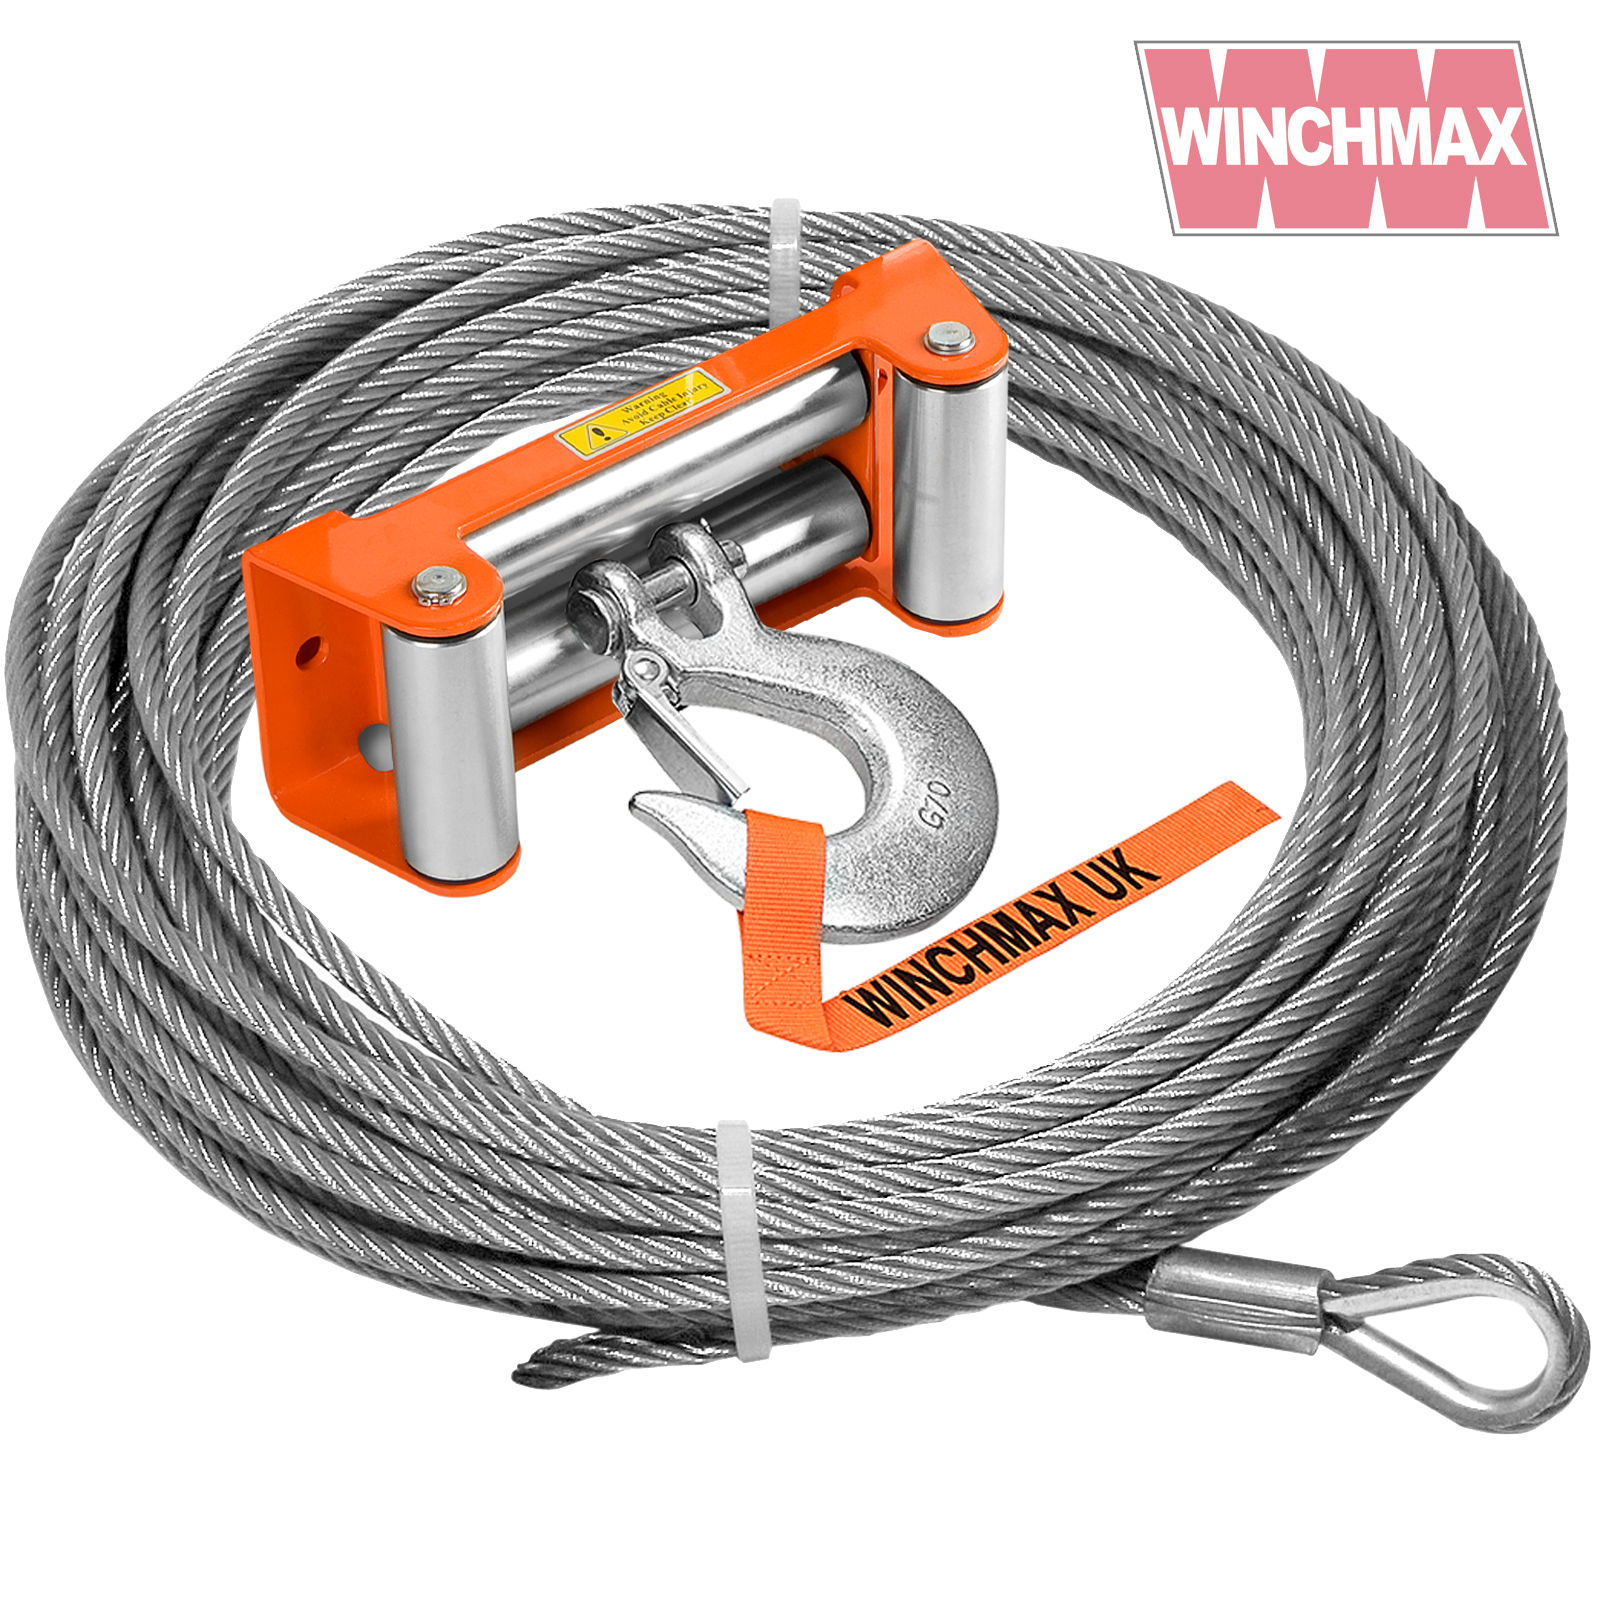 Steel Rope 26m X 12mm, Hole Fix. Roller Fairlead. 1/2 Inch Clevis